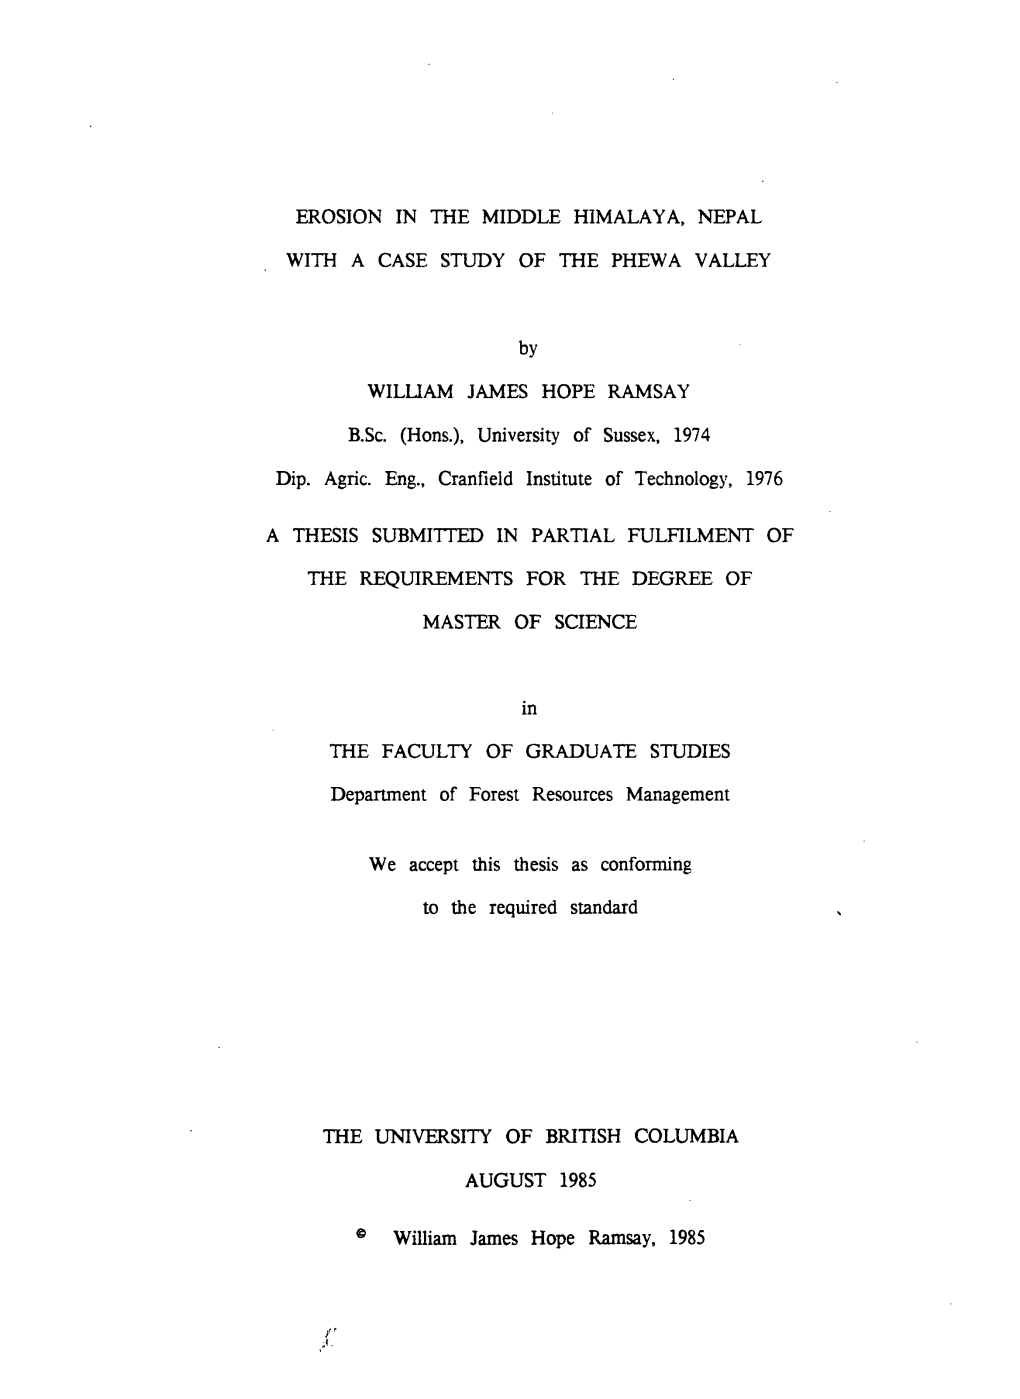 EROSION in the MIDDLE HIMALAYA, NEPAL with a CASE STUDY of the PHEW a VALLEY by WILLIAM JAMES HOPE RAMSAY B.Sc. (Hons.), Univers